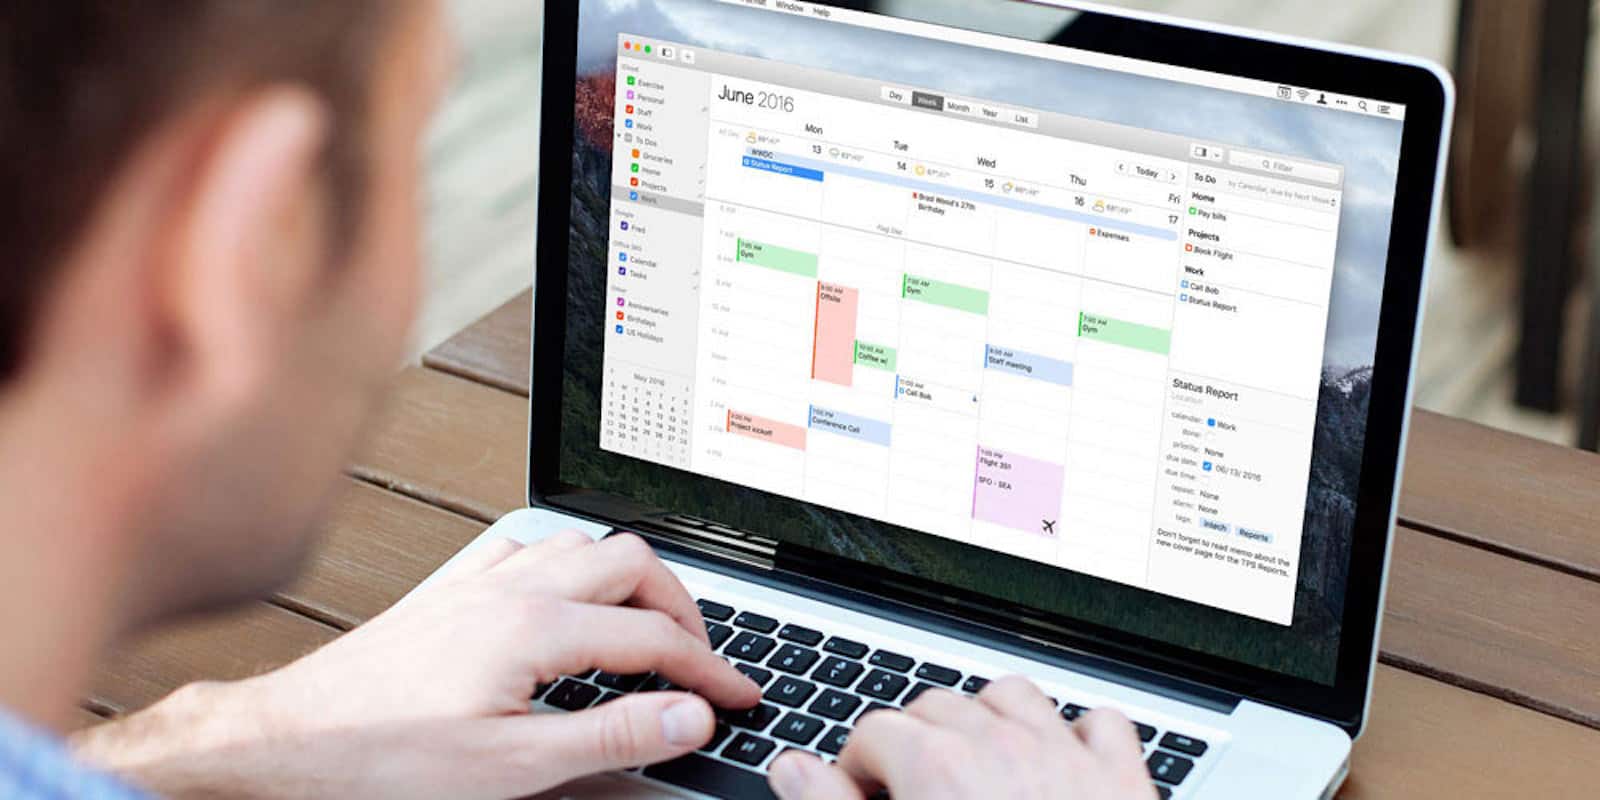 With task integration, cloud syncing, and customization options, this is a cut above your standard calendar for Mac.